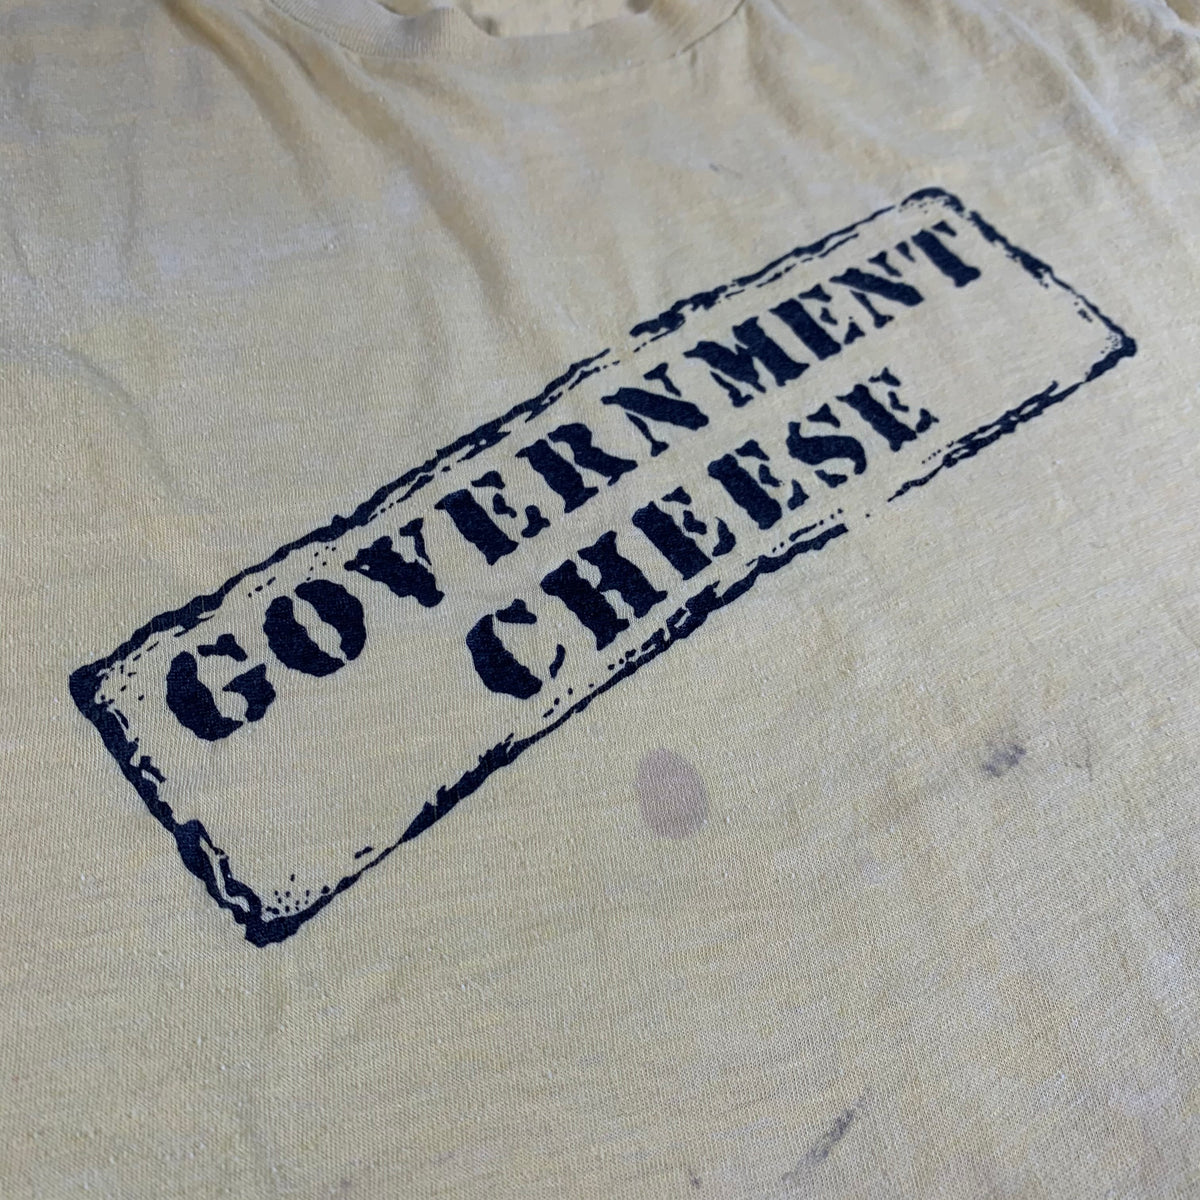 Vintage Government Cheese &quot;Reptile Records&quot; T-Shirt